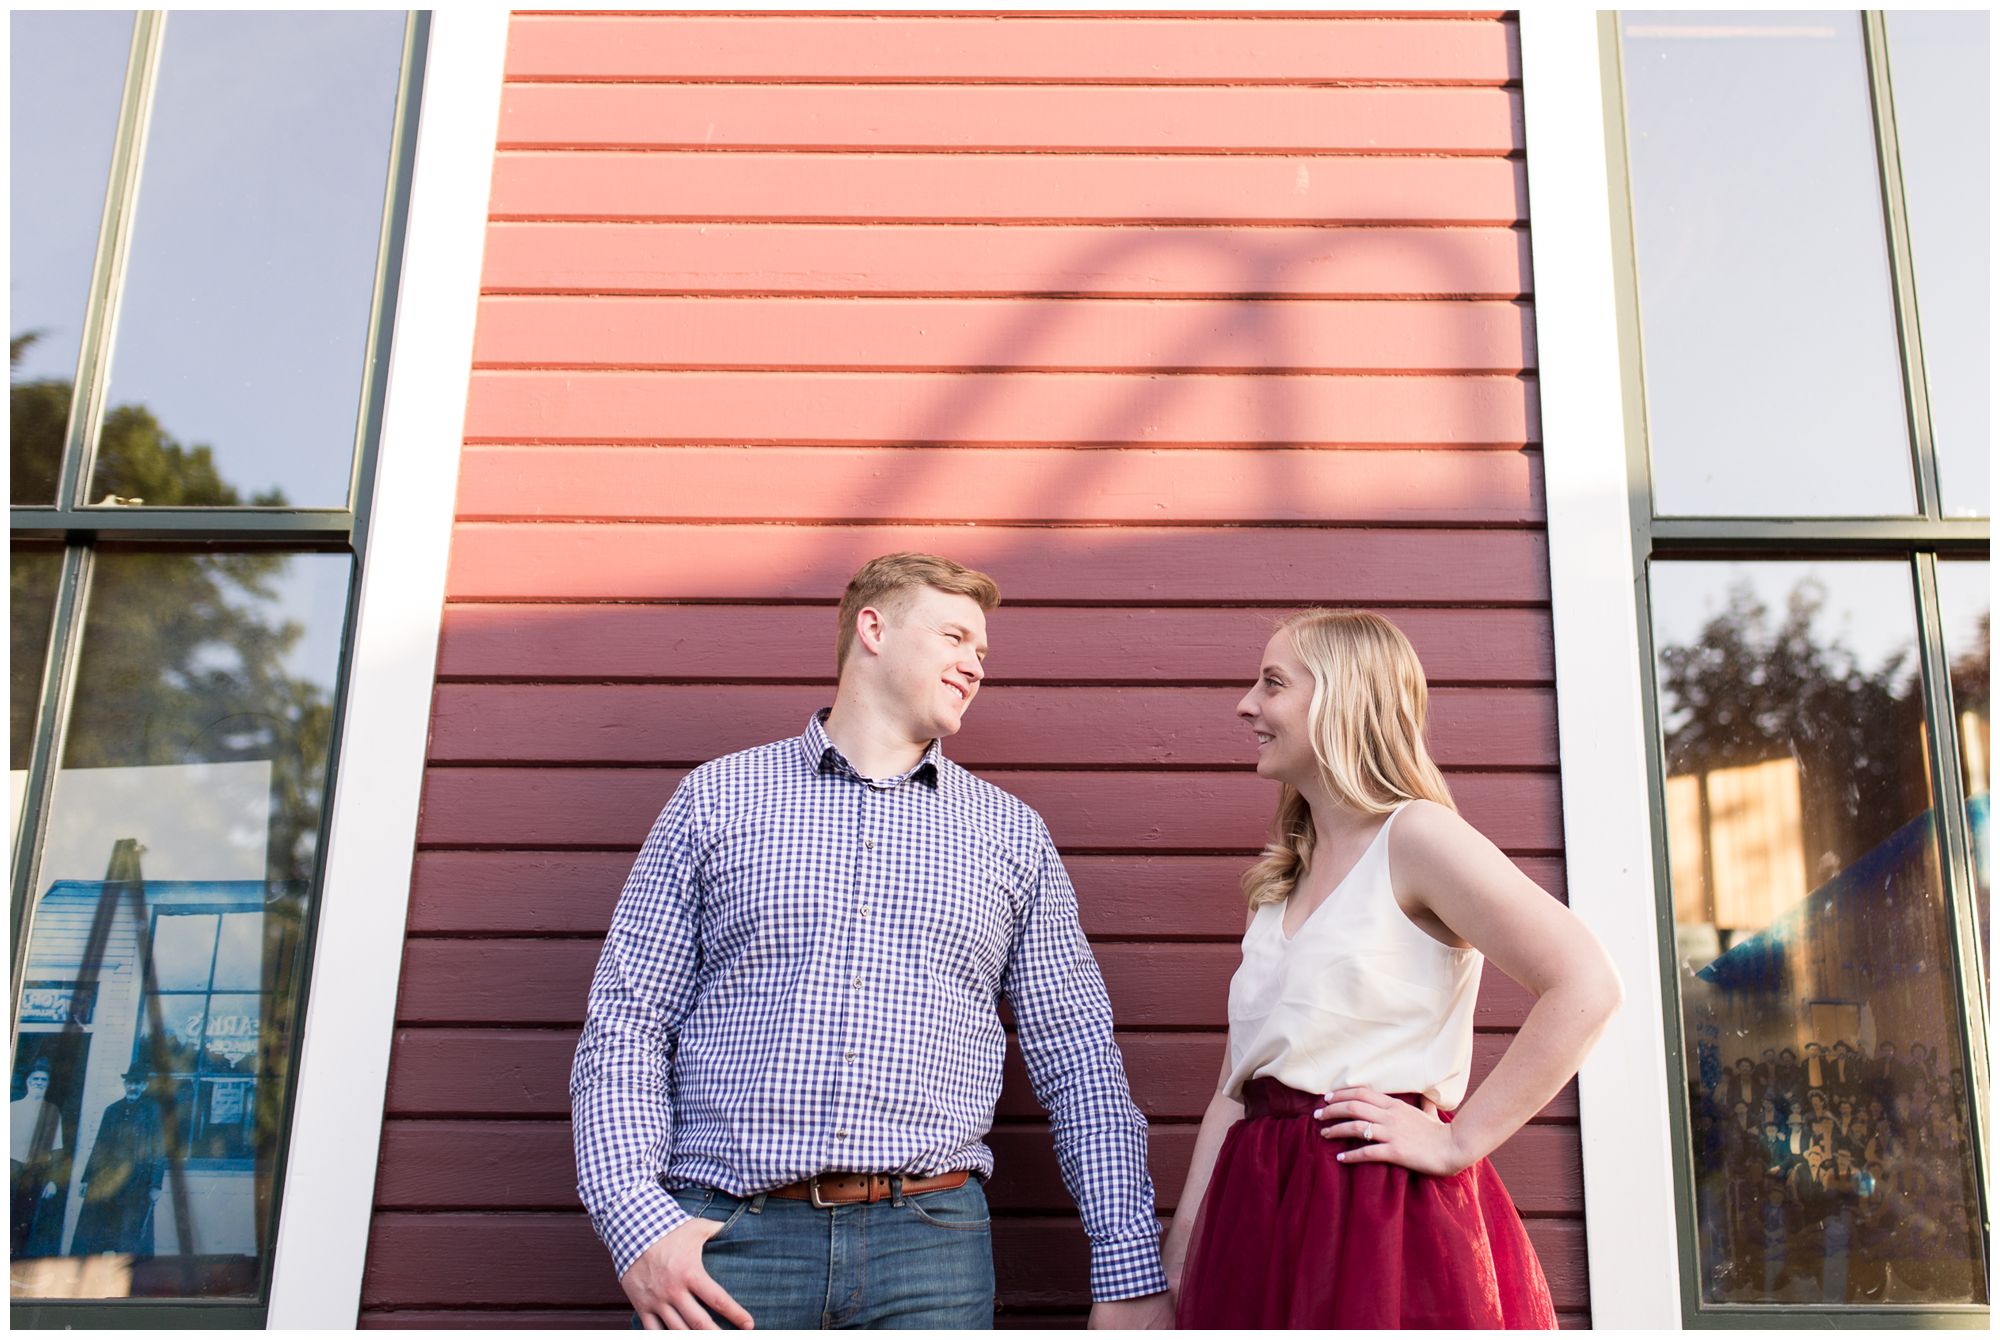 Issaquah Washington engagement session at Issaquah Depot Museum // Autumn Howell Photography